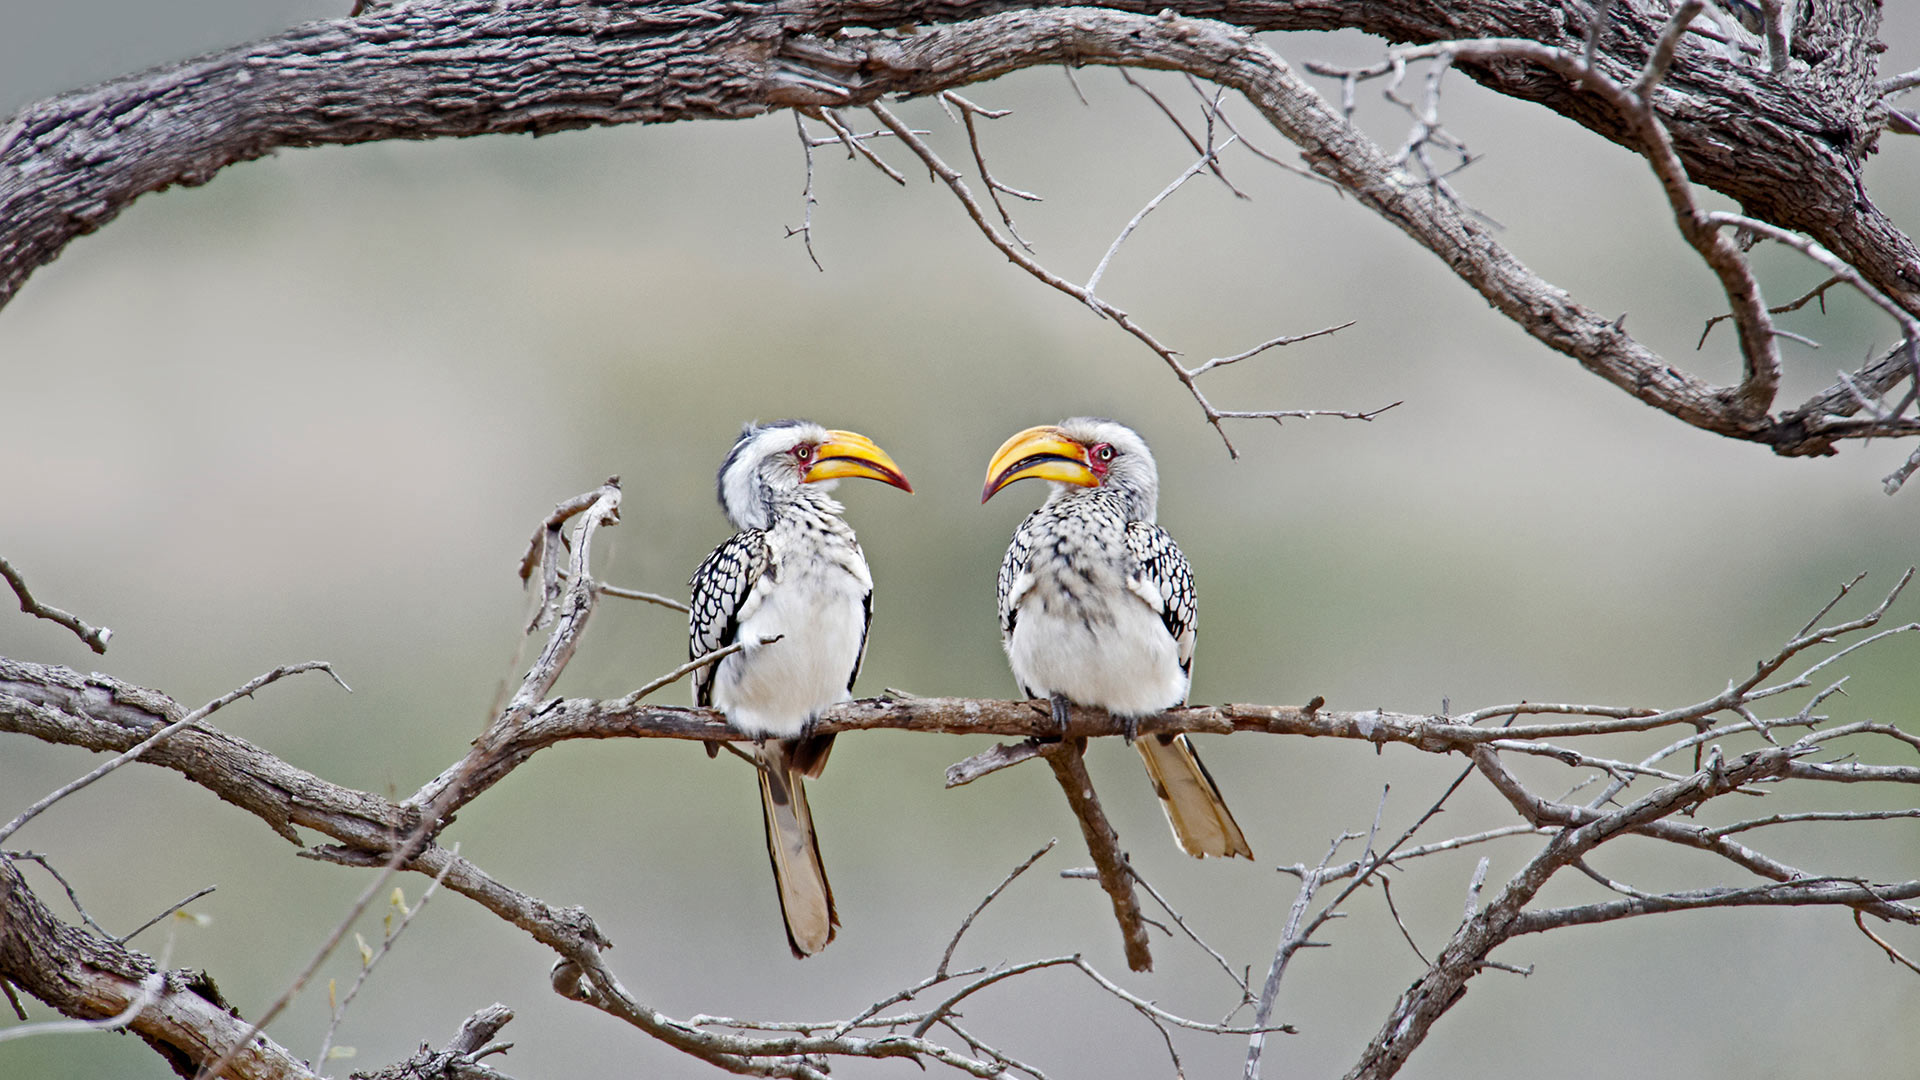 Download Bing image: Just a couple of yellow-billed hornbills ...